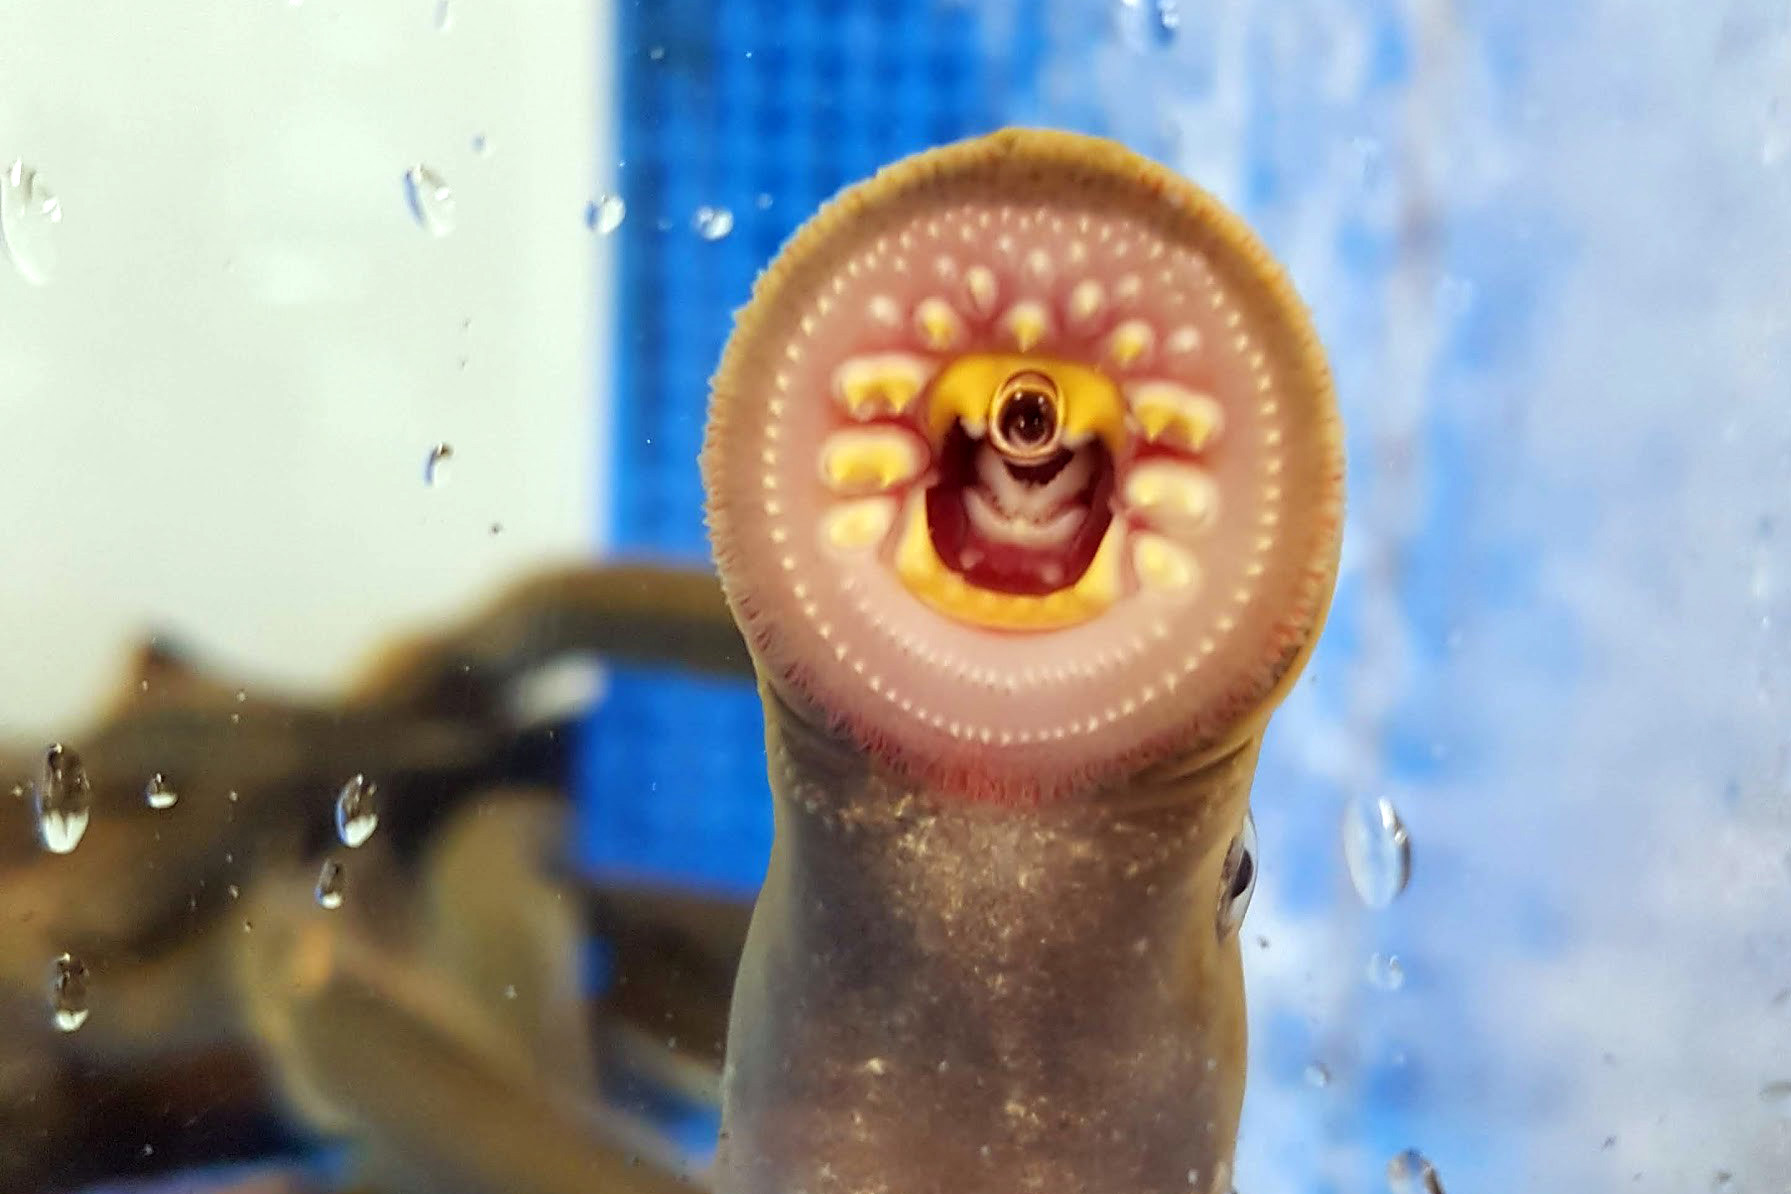 The lamprey may not look sophisticated but this lineage of ancient, jawless fish gave rise to an important genetic step in the evolution of complex brains. Image credit: Alex de Mendoza